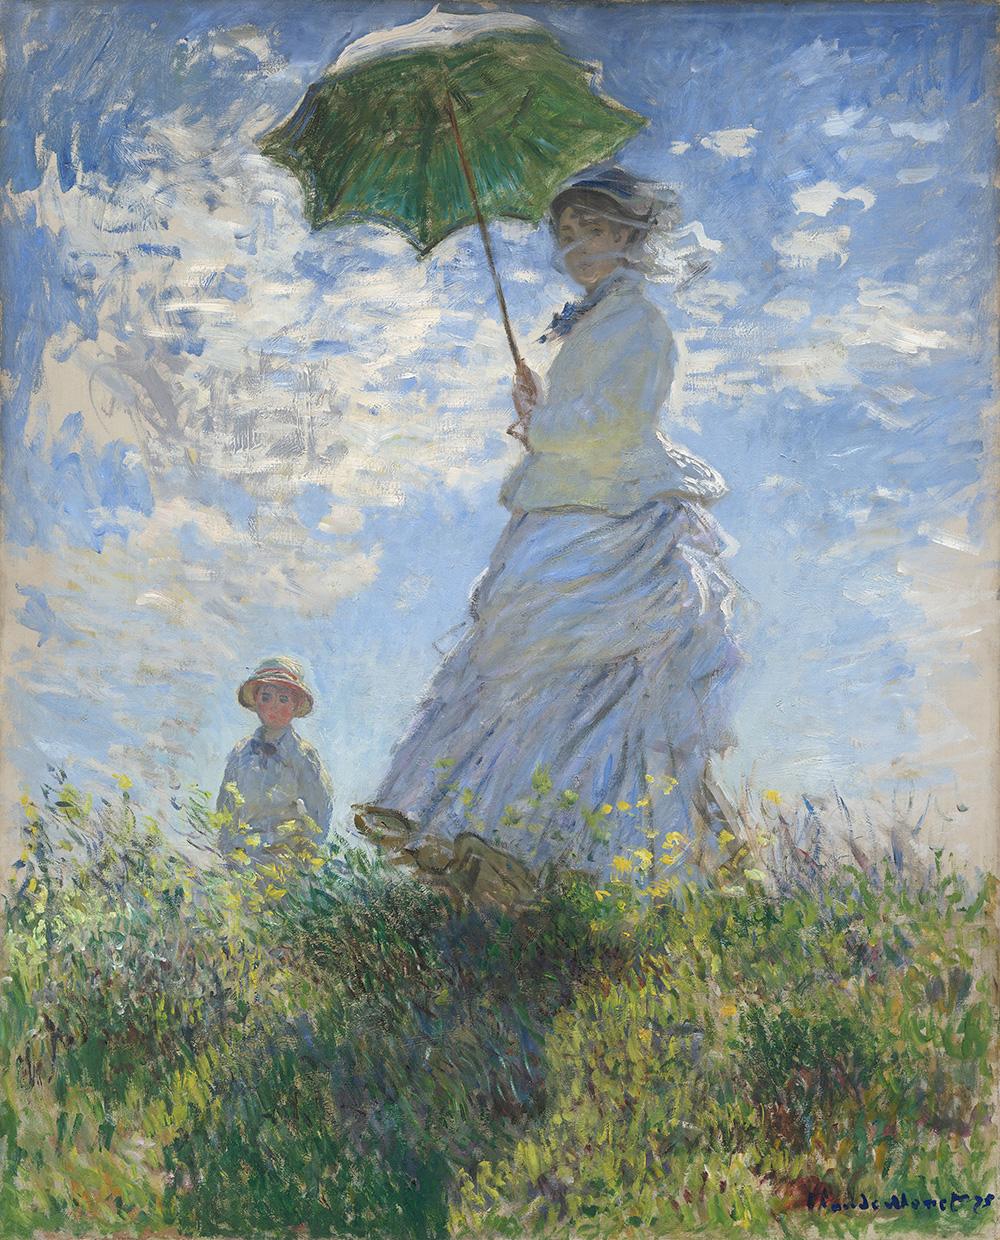 Woman with a Parasol—Madame Monet and Her Son